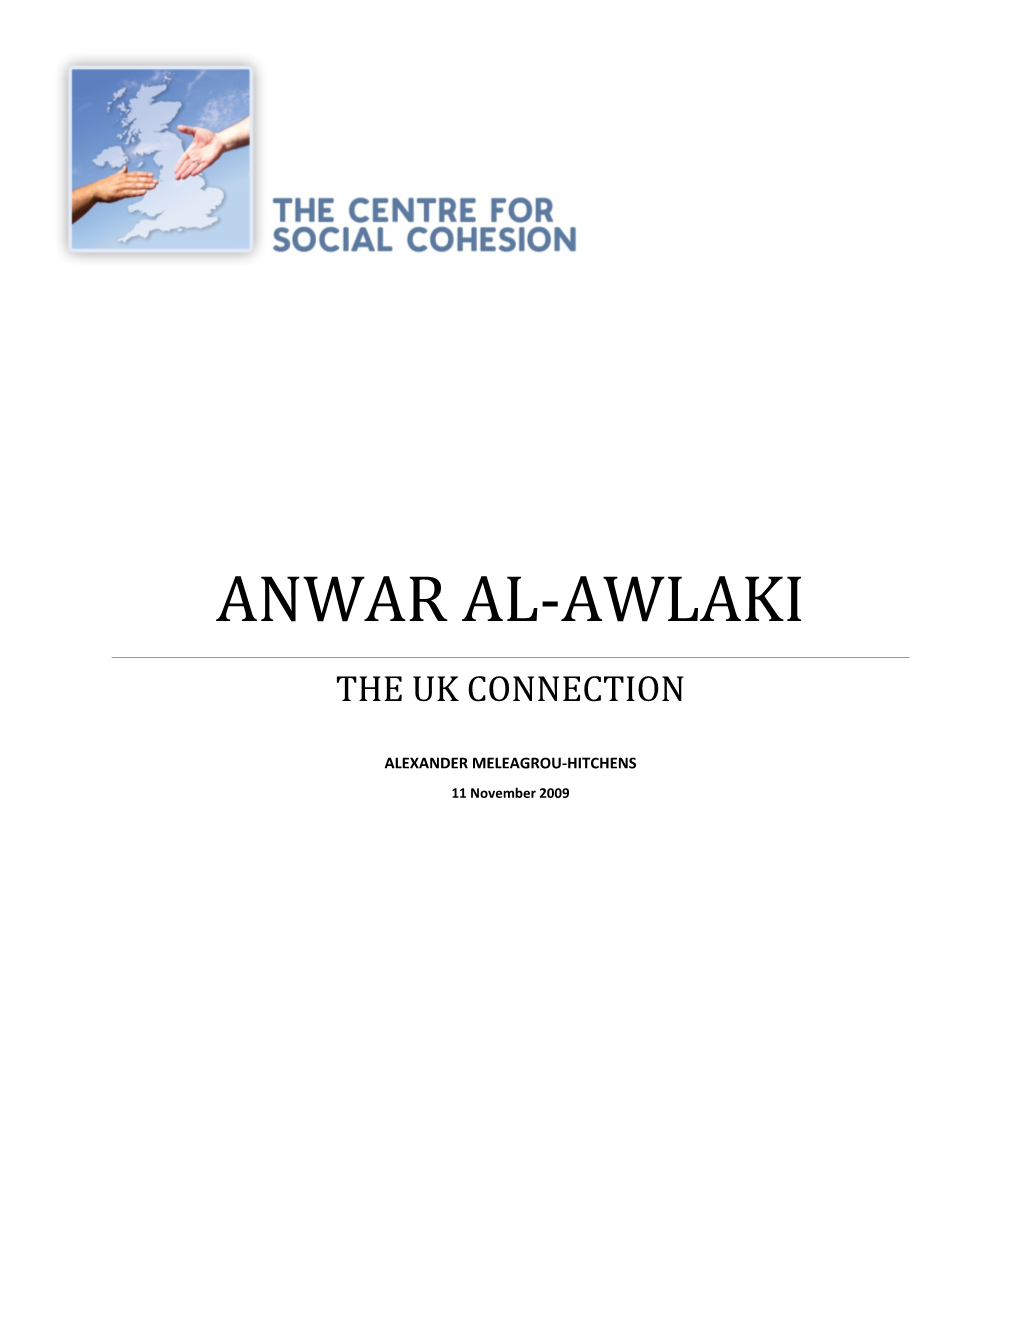 Anwar Al-Awlaki Is a Pro Al-Qaeda Preacher Based in Yemen with Extensive Connections to a Number of Terrorist Plots, Including 9/11